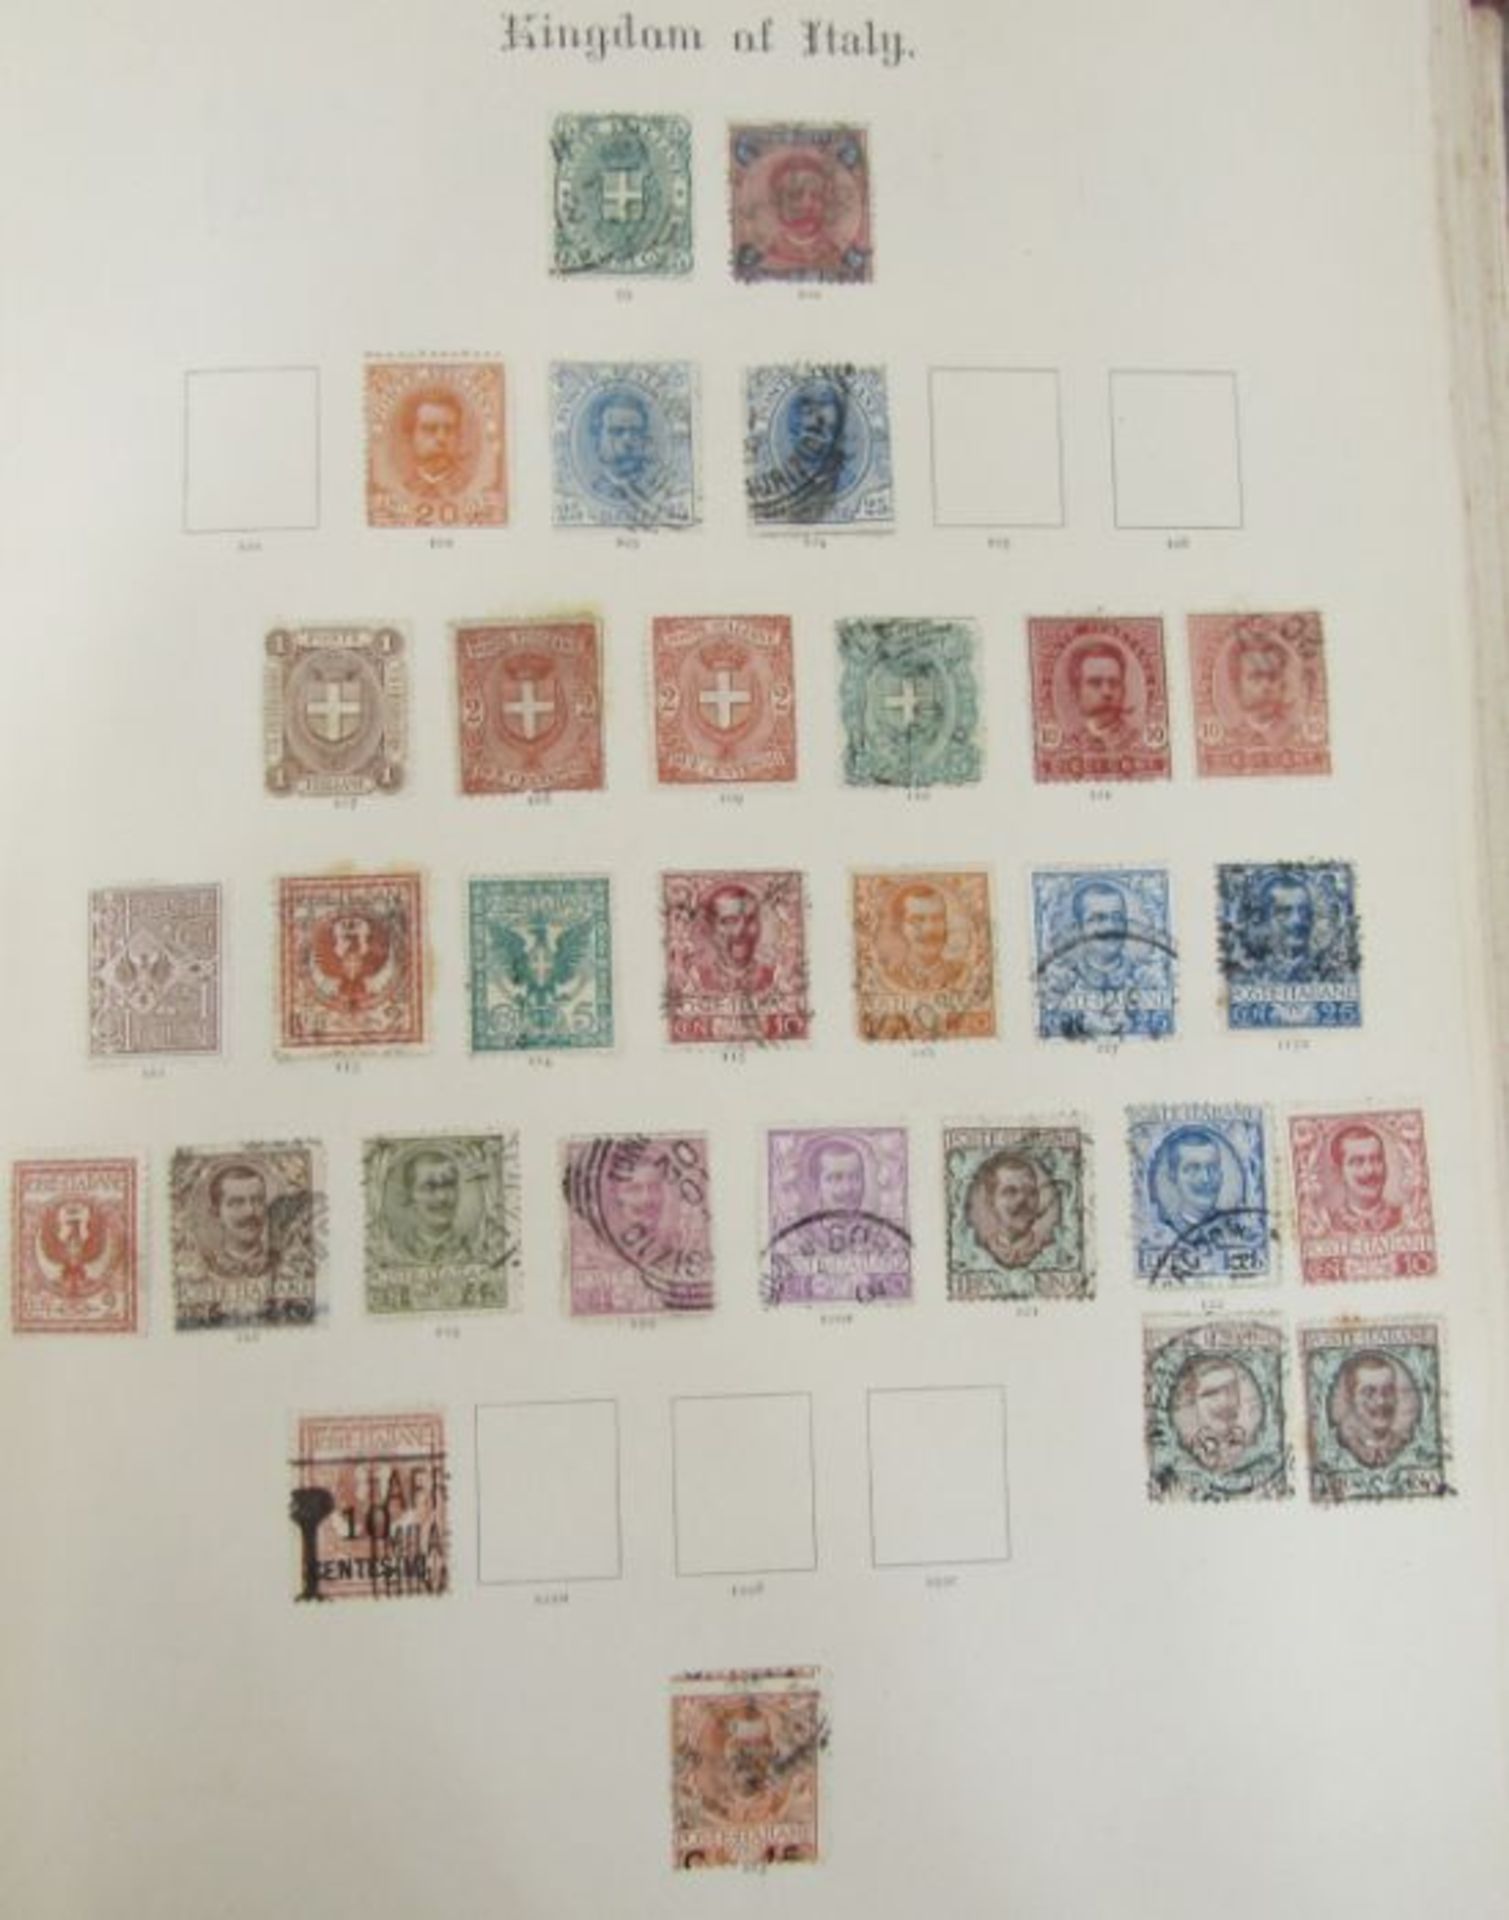 Europe: Sectional Imperial album of countries H-T, starting Holland ending Turkey including some - Image 9 of 10